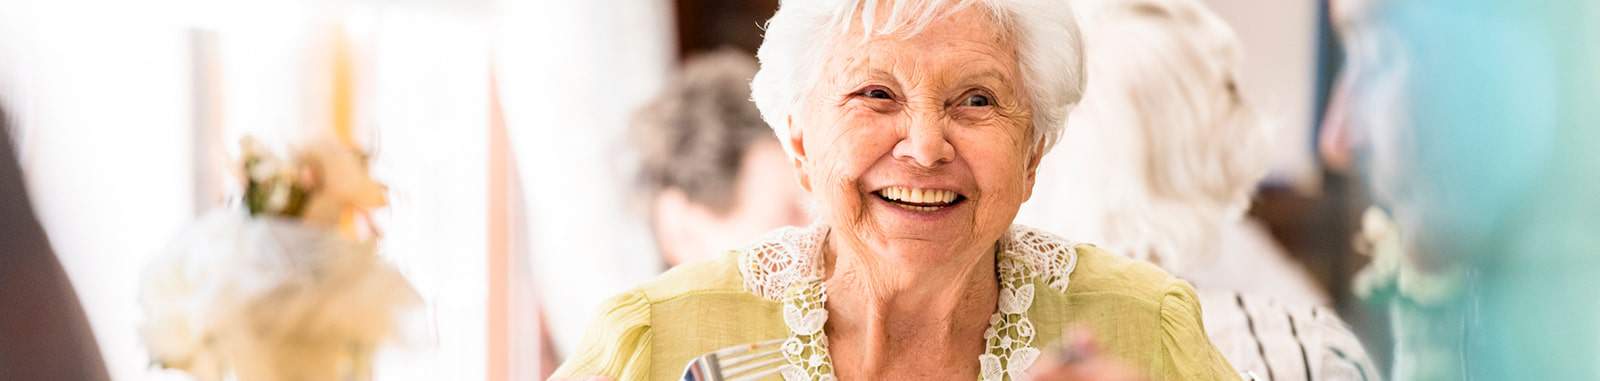 An older woman smiles and enjoys herself at a senior living community